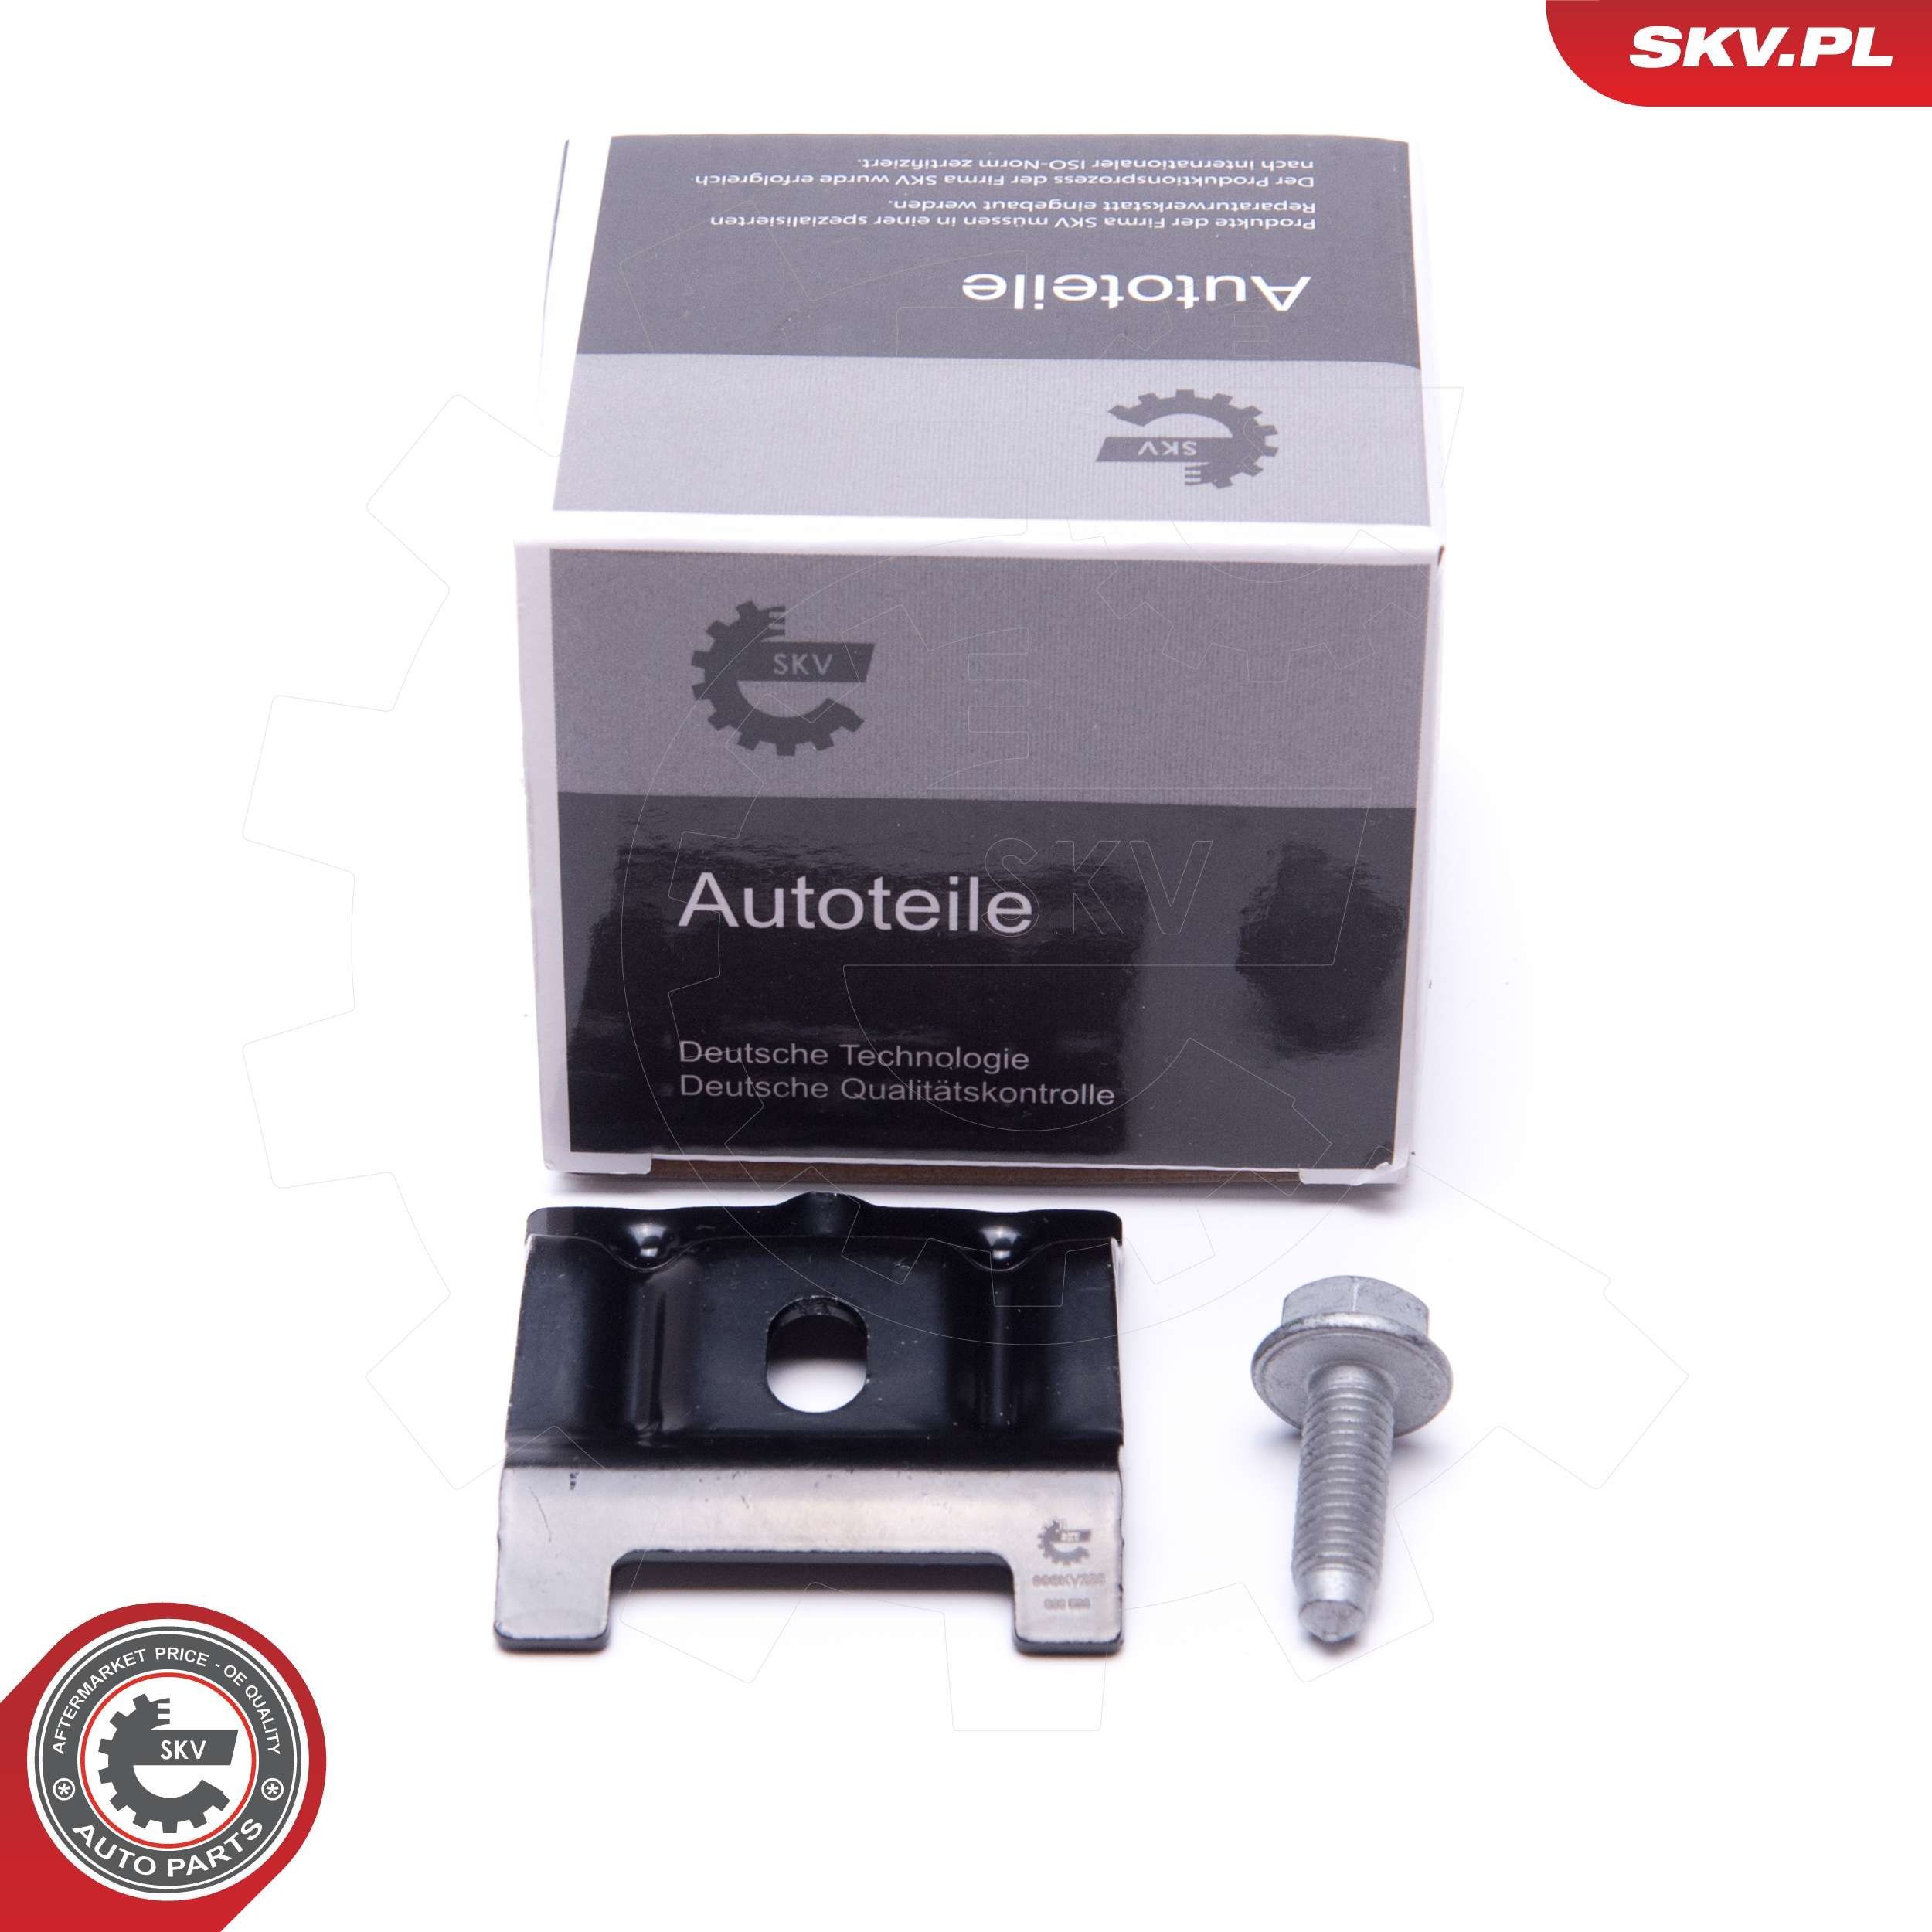 Fixation Batterie Voiture,Fixation Batterie Voiture,Support Batterie  Voiture,Support De Batterie,Support Universel Replacement Pour Support De  Support